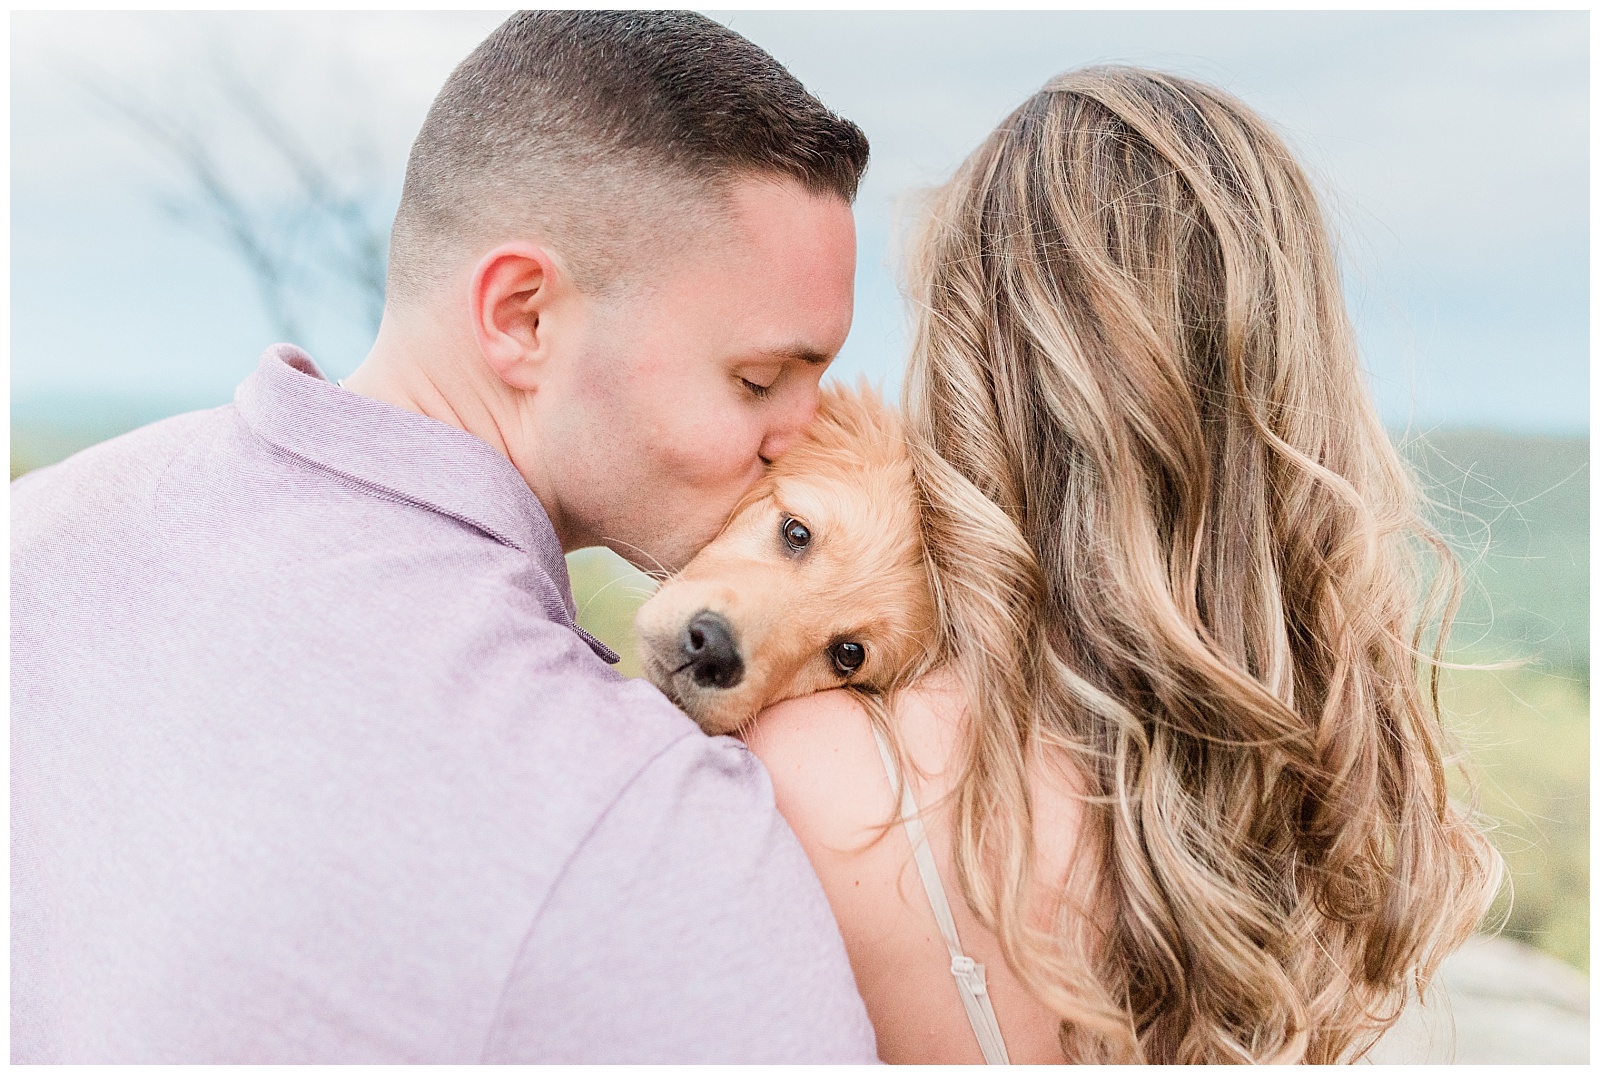 A couple holds a golden retriever puppy and kisses her on the side of the head.